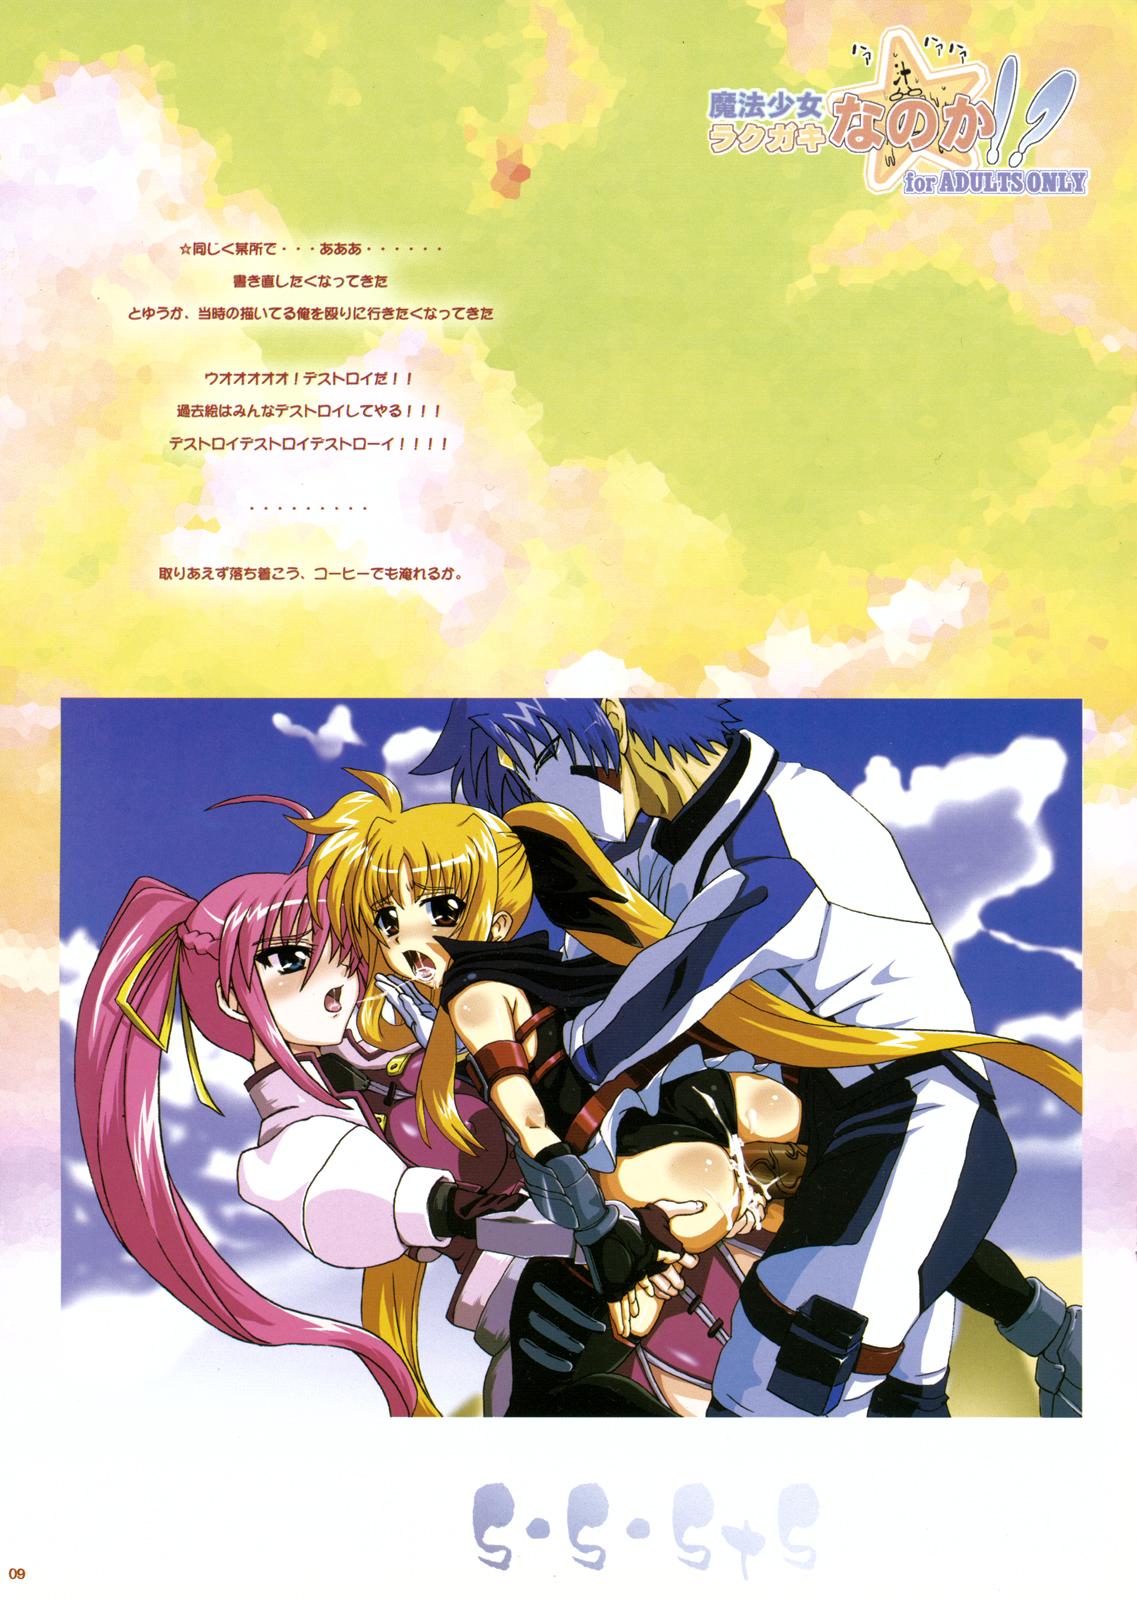 Pussy Eating s・s・sts - Mahou shoujo lyrical nanoha Small Tits Porn - Page 9